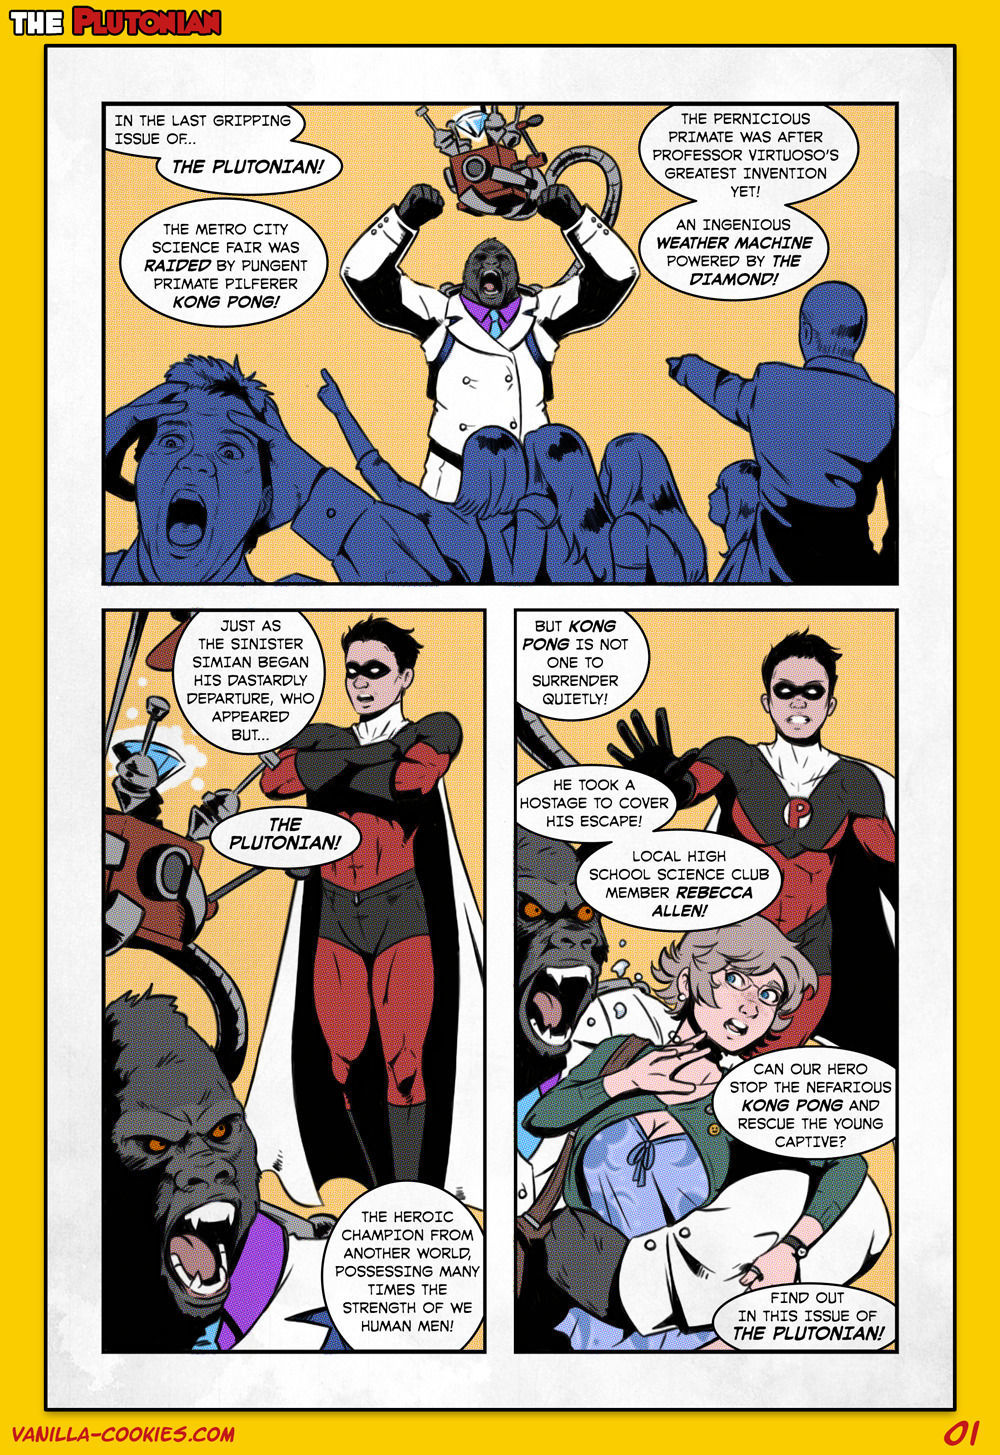 The Plutonian Dave Cheung page 2